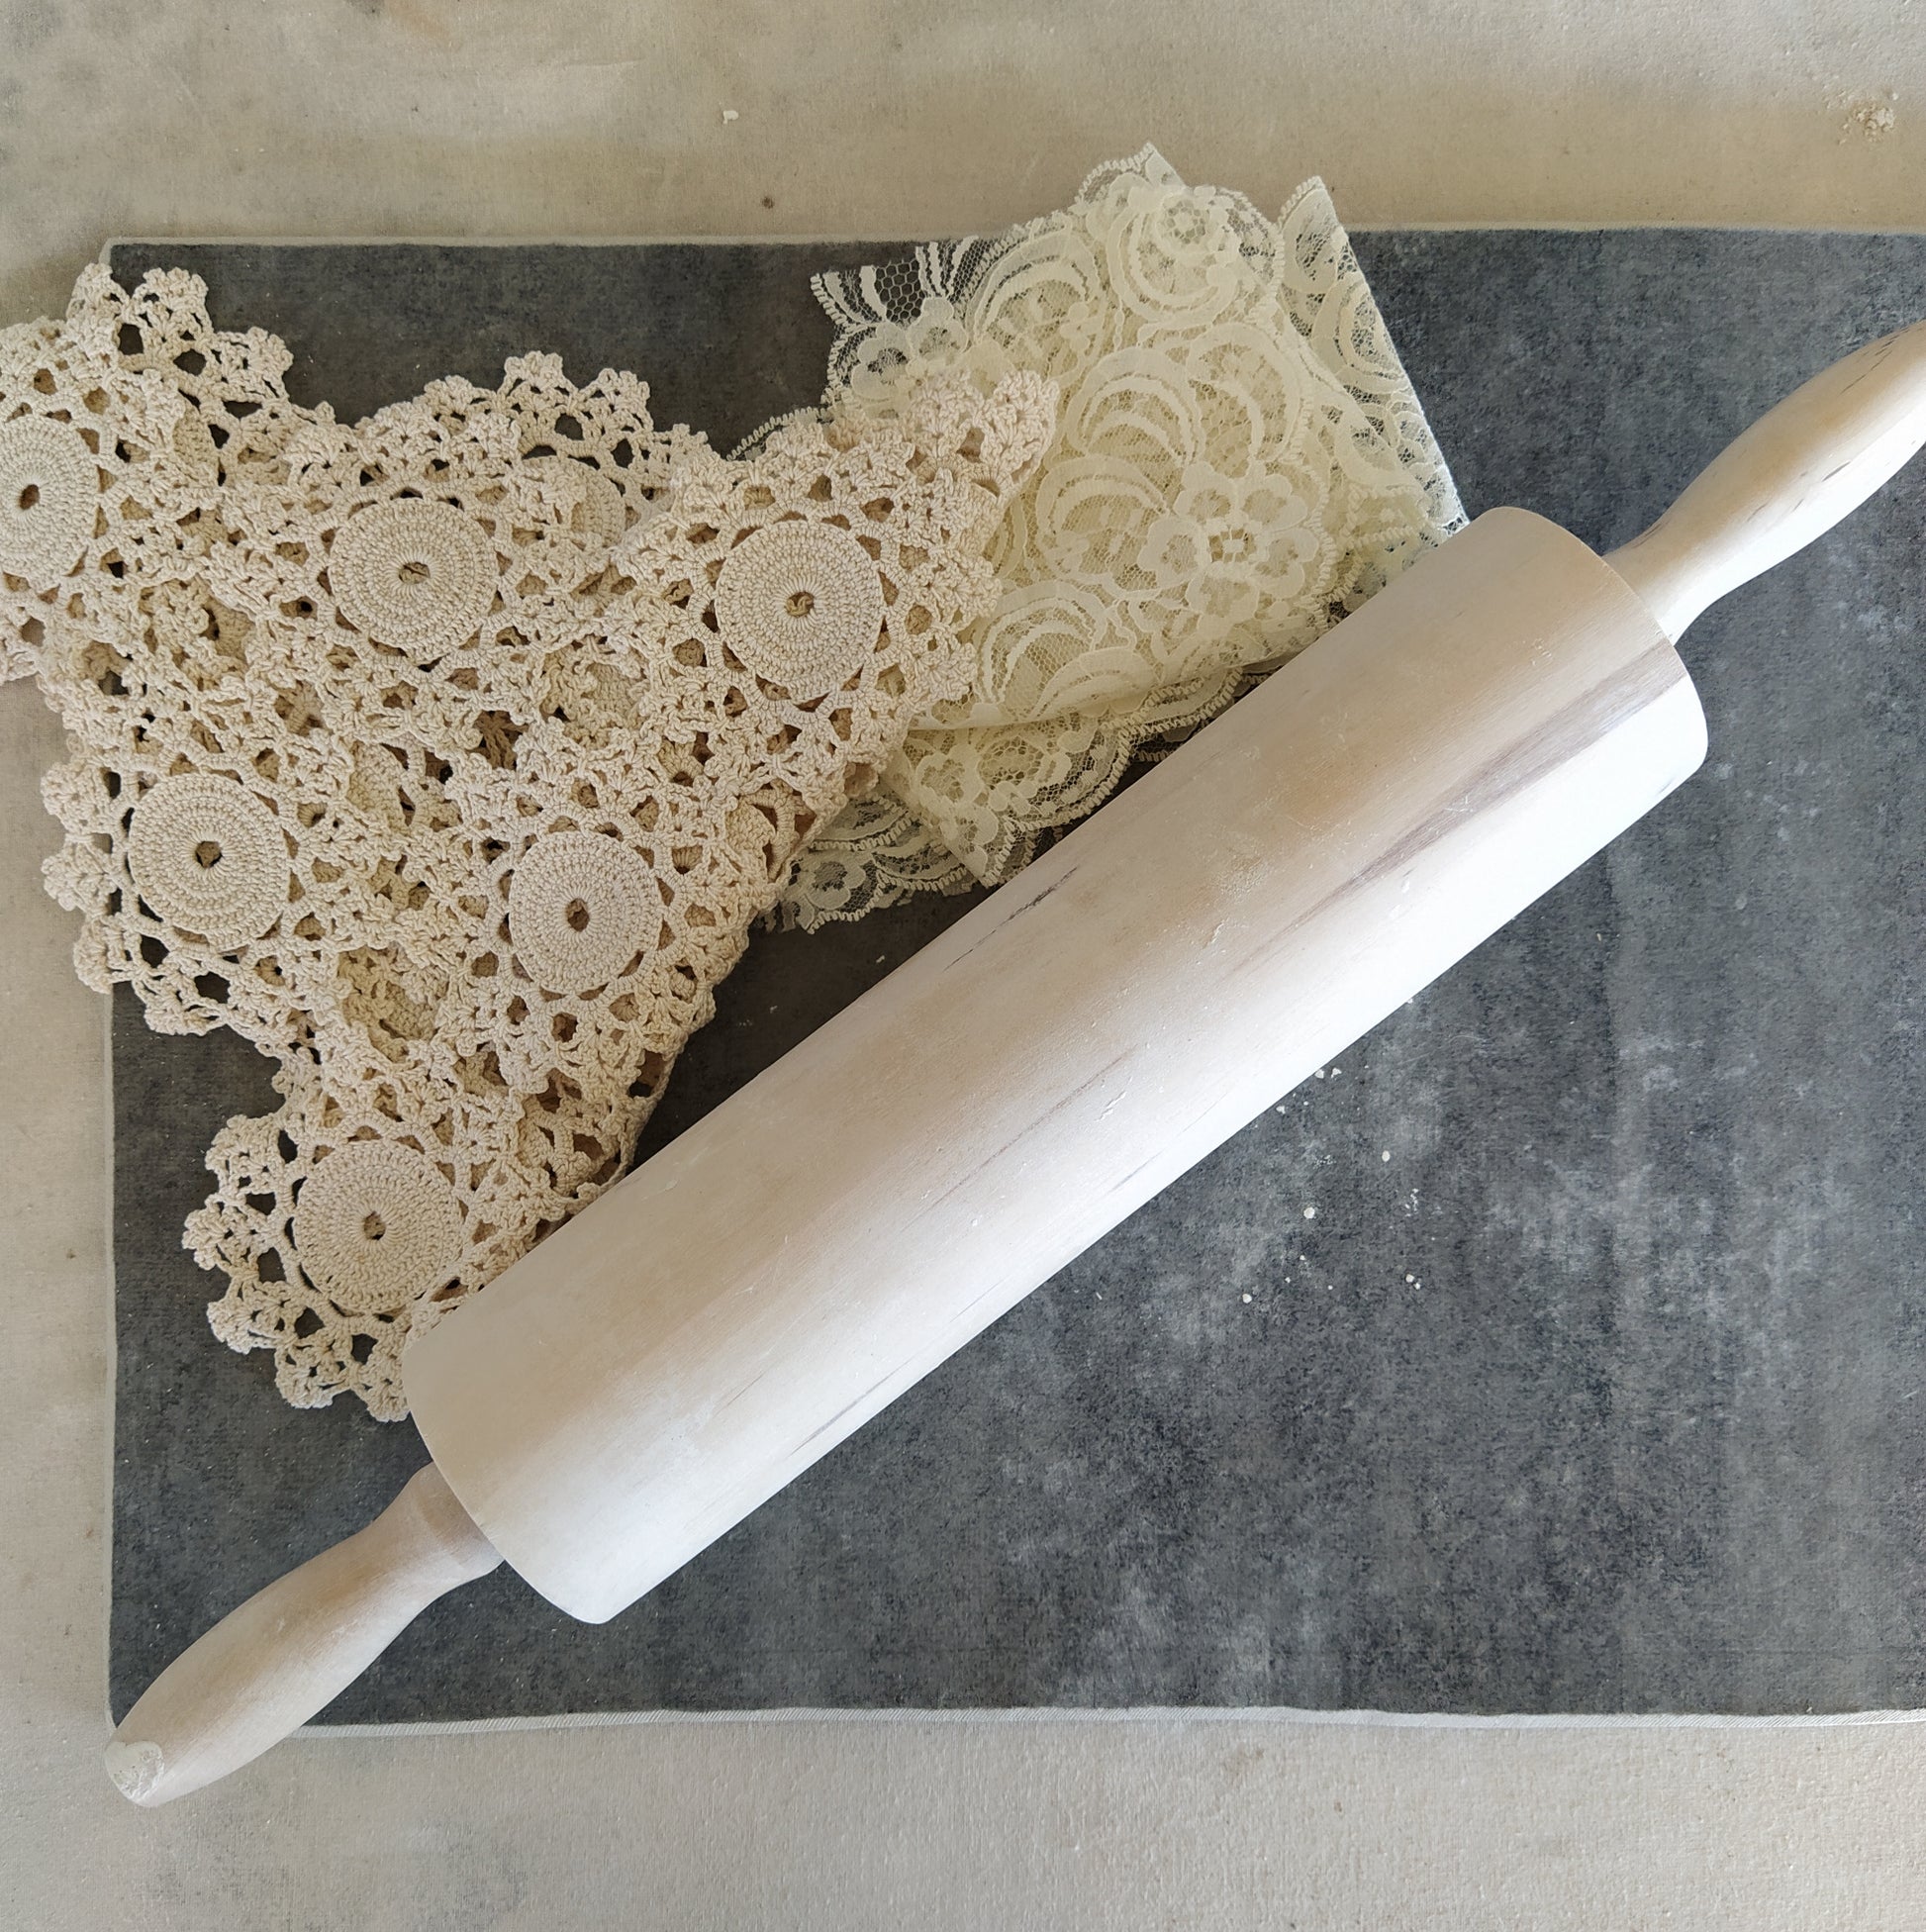 Rolling pin and lace ready for a Summer Freckles Pressed Lace workshop